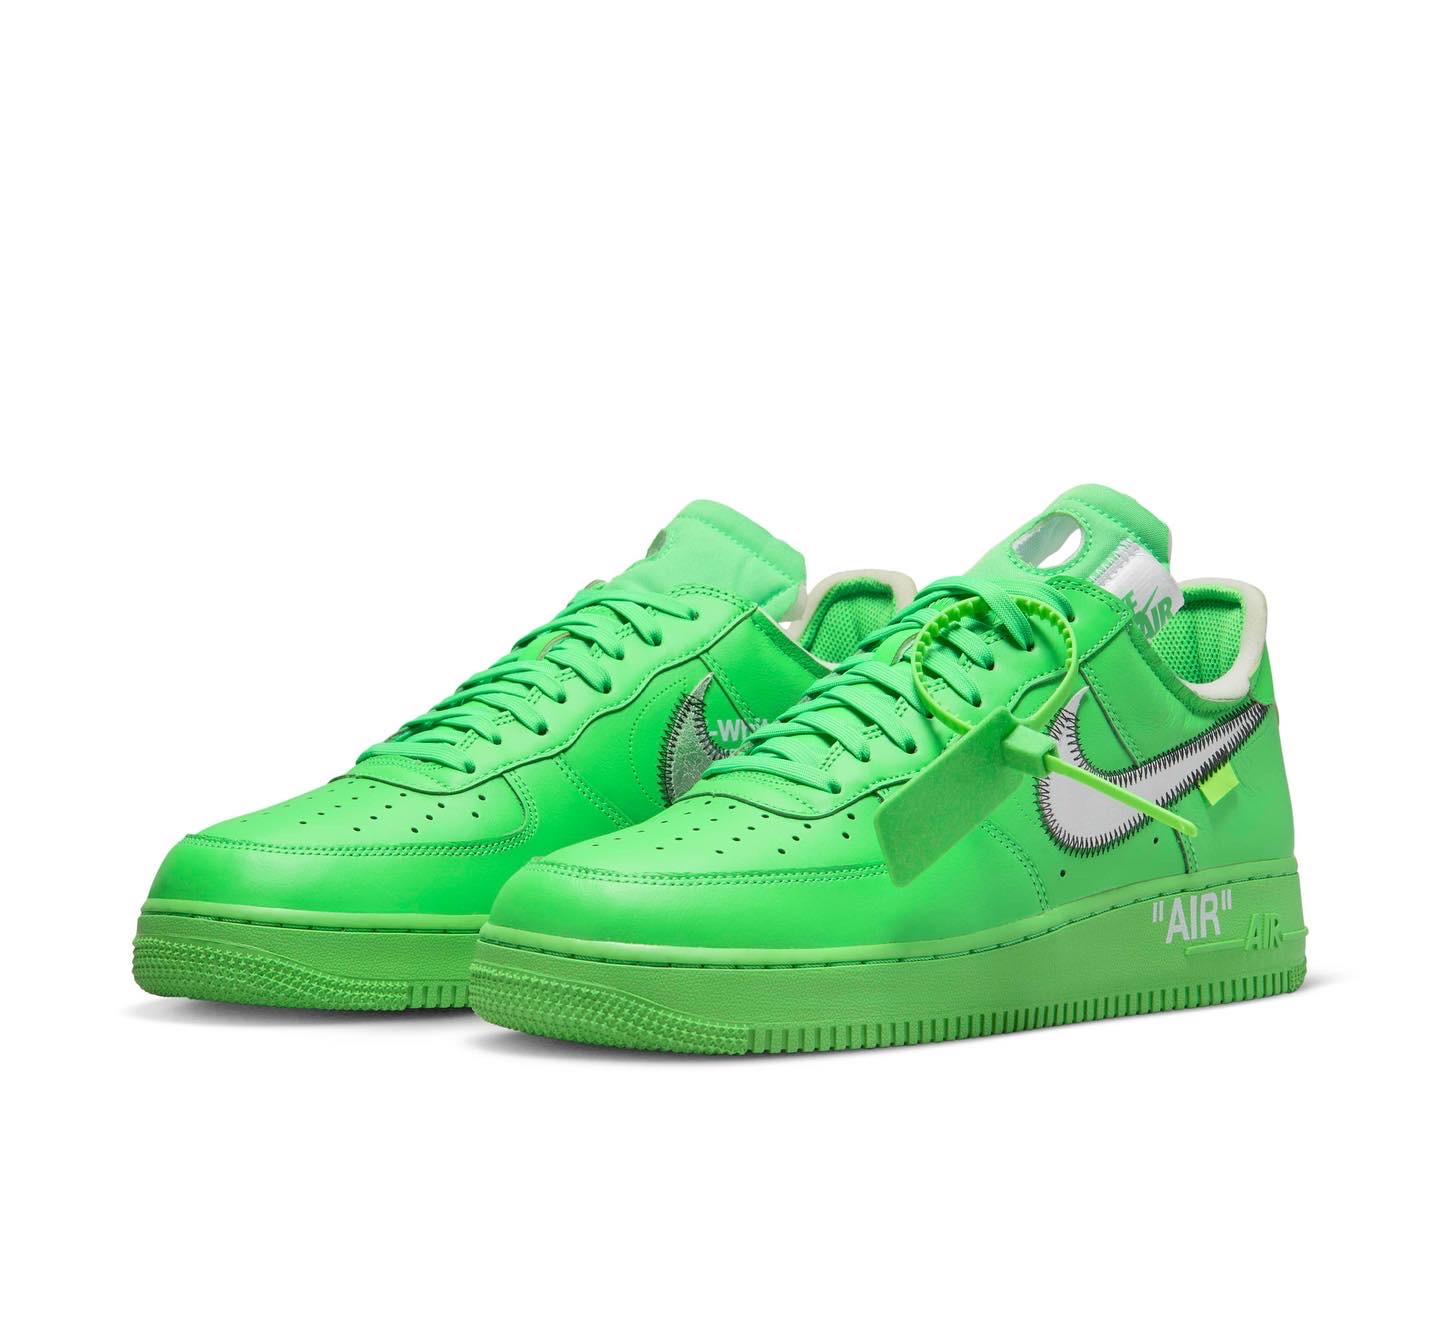 Brooklyn Museum employees rockin the green OW Air Force 1s 🔥🥵🔥